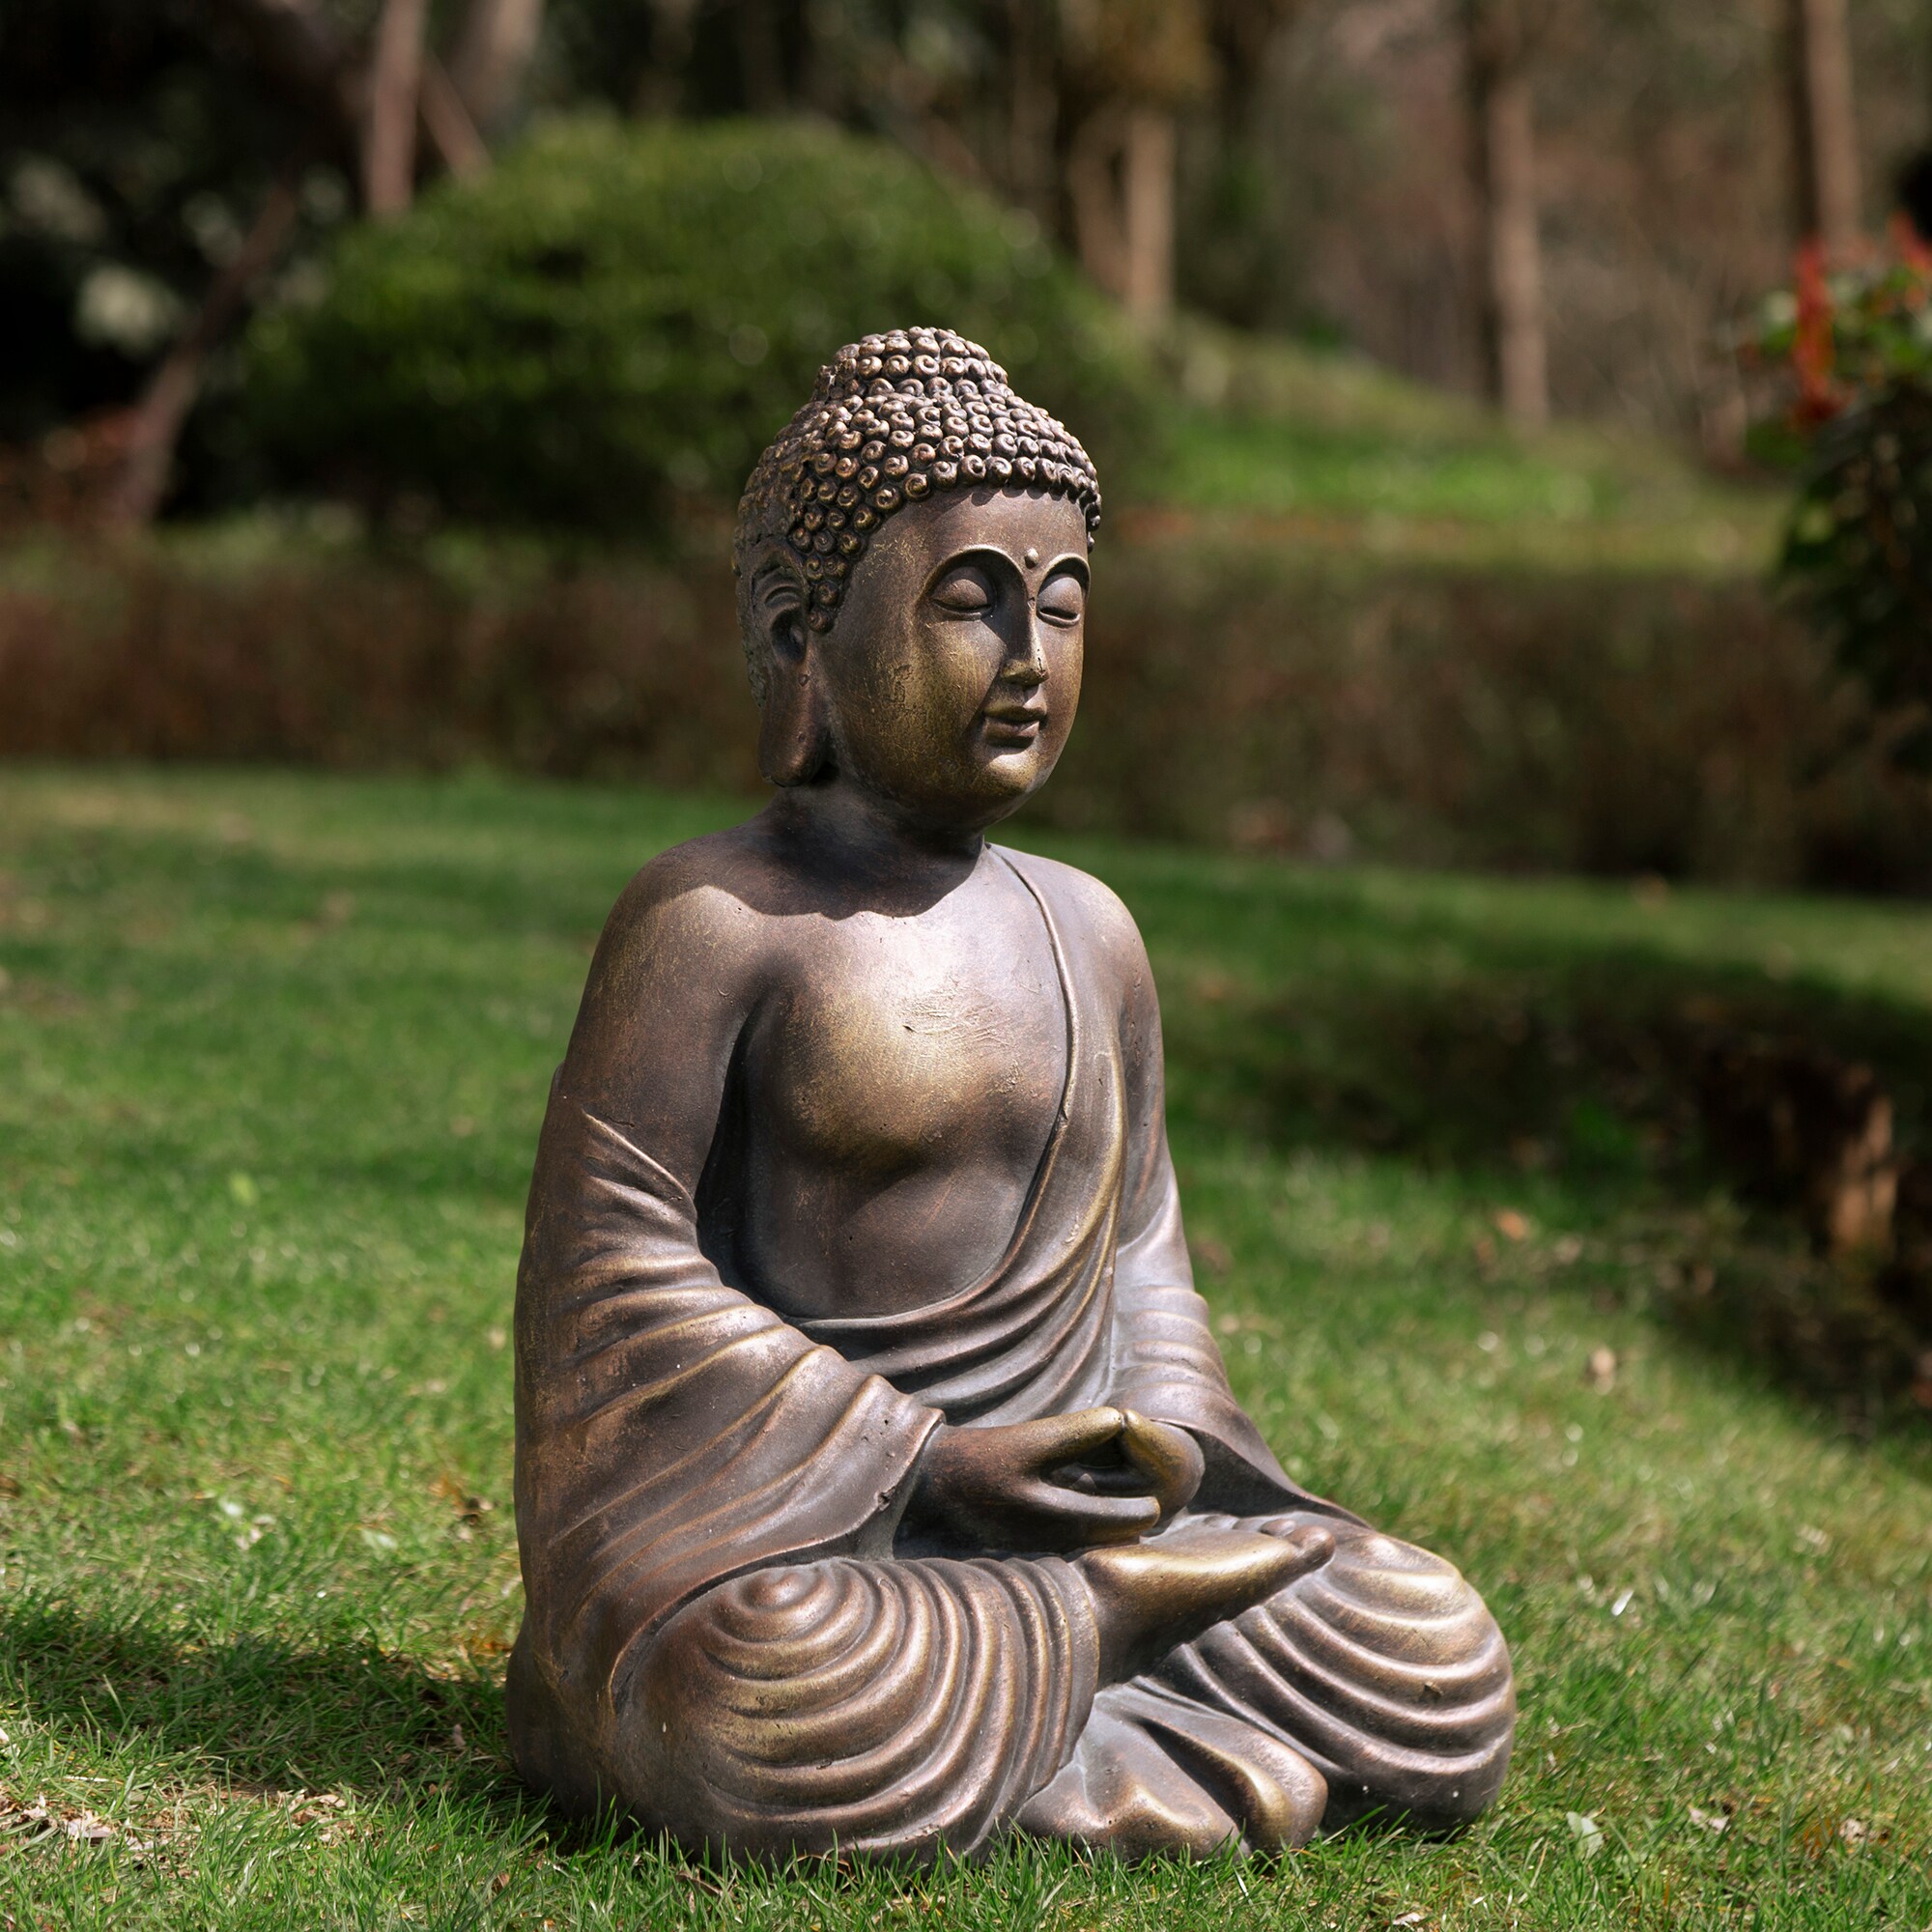 Glitzhome 19-in H x 14.25-in W Brown Buddha Garden Statue at Lowes.com